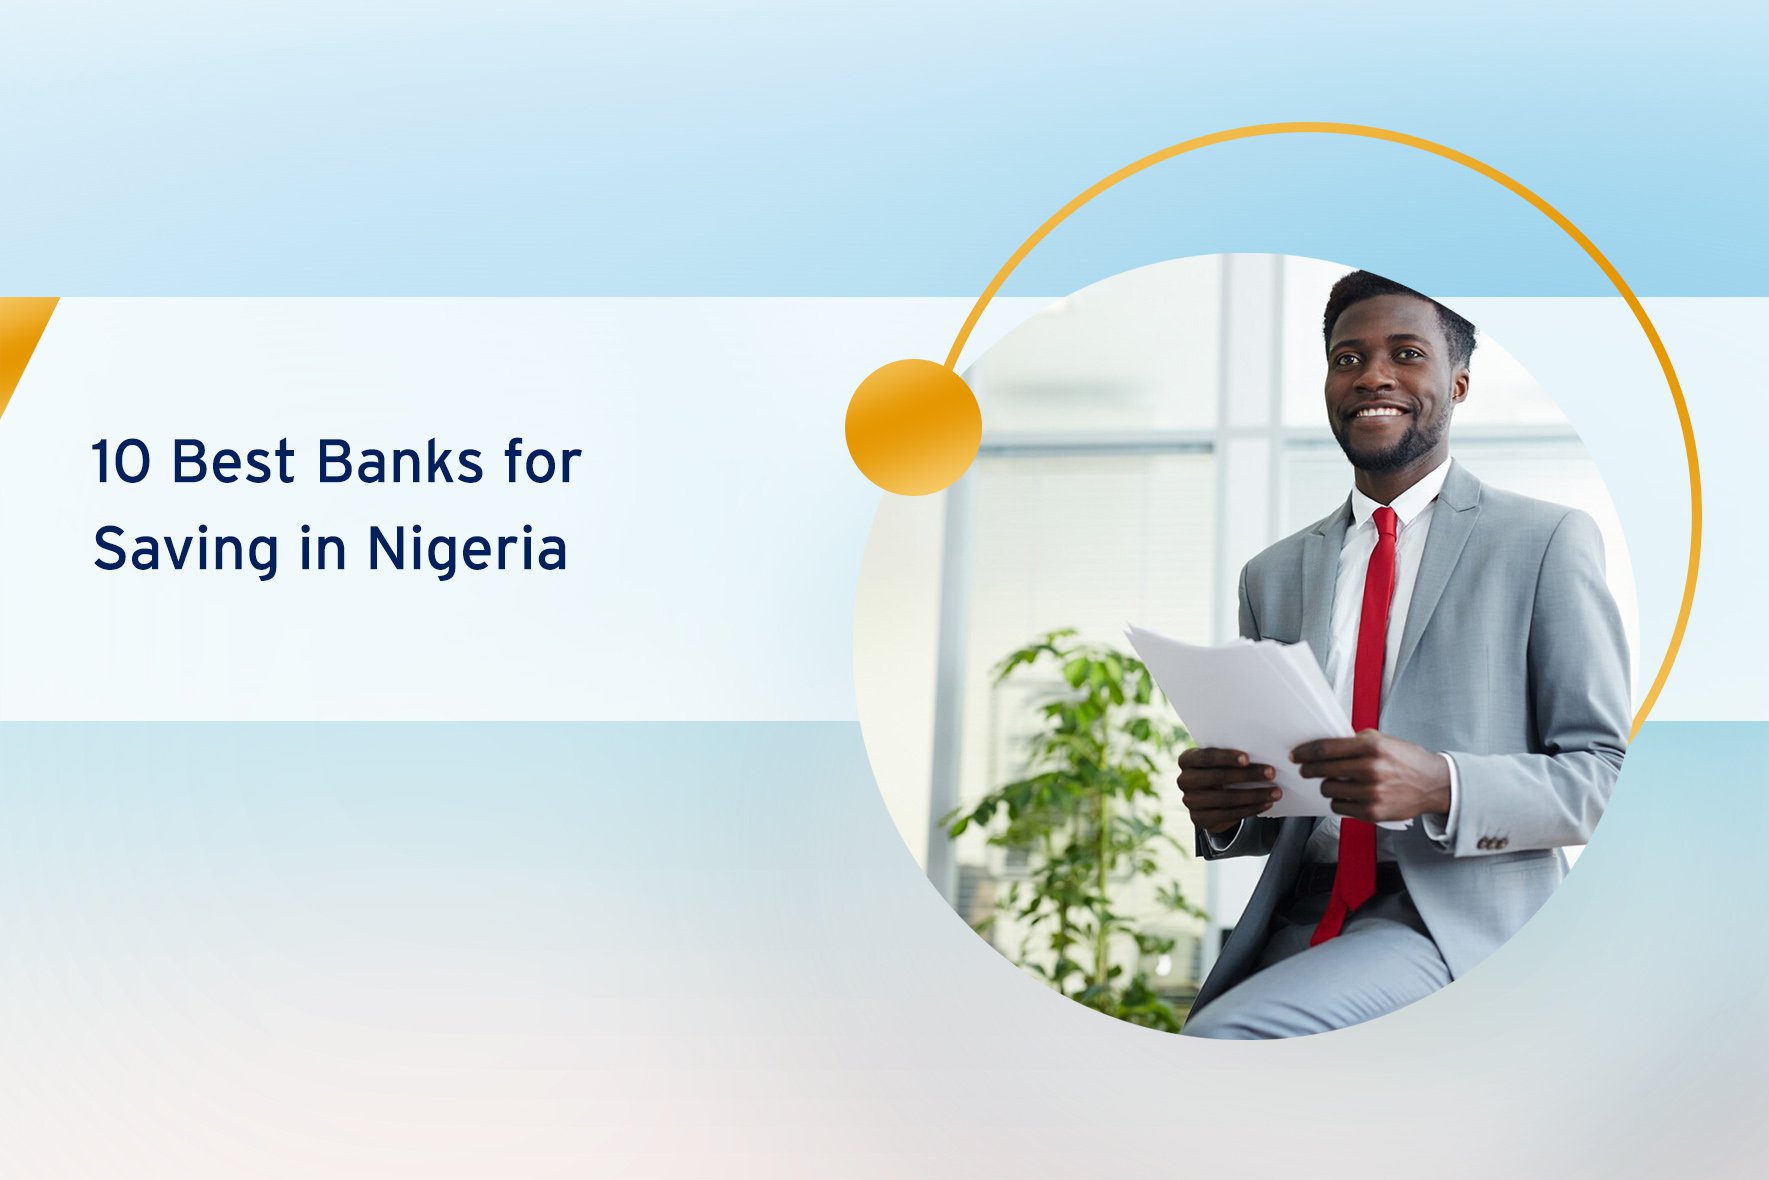 10 Best Banks for Saving in Nigeria